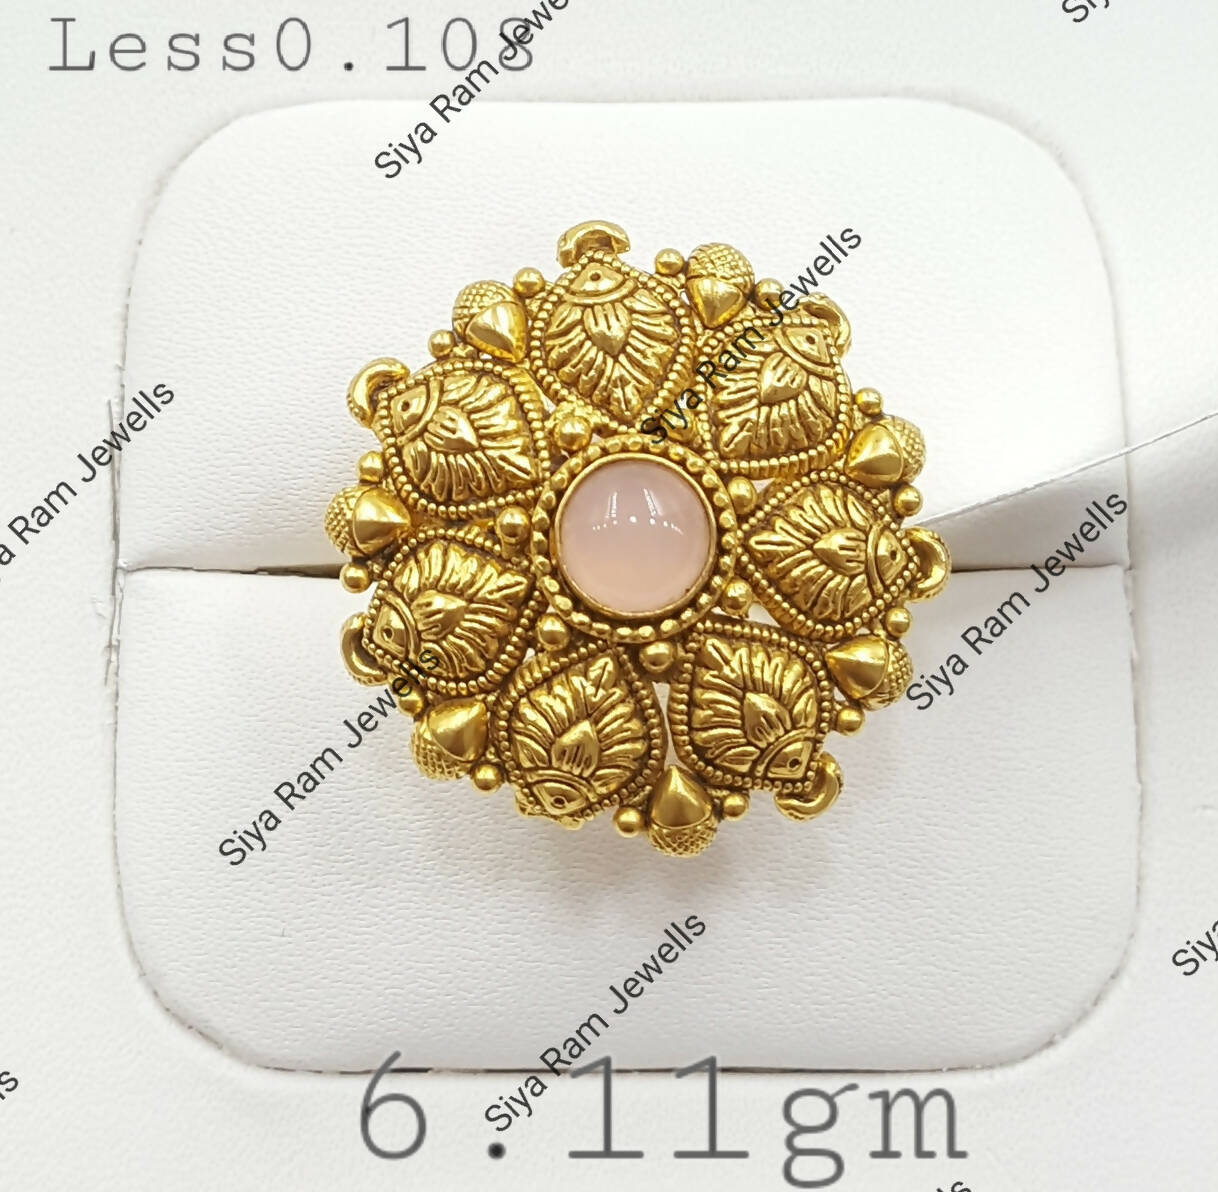 Latest Light 22k Gold Ring Designs with Weight and Price | Gold ring designs,  Latest gold ring designs, Ring designs